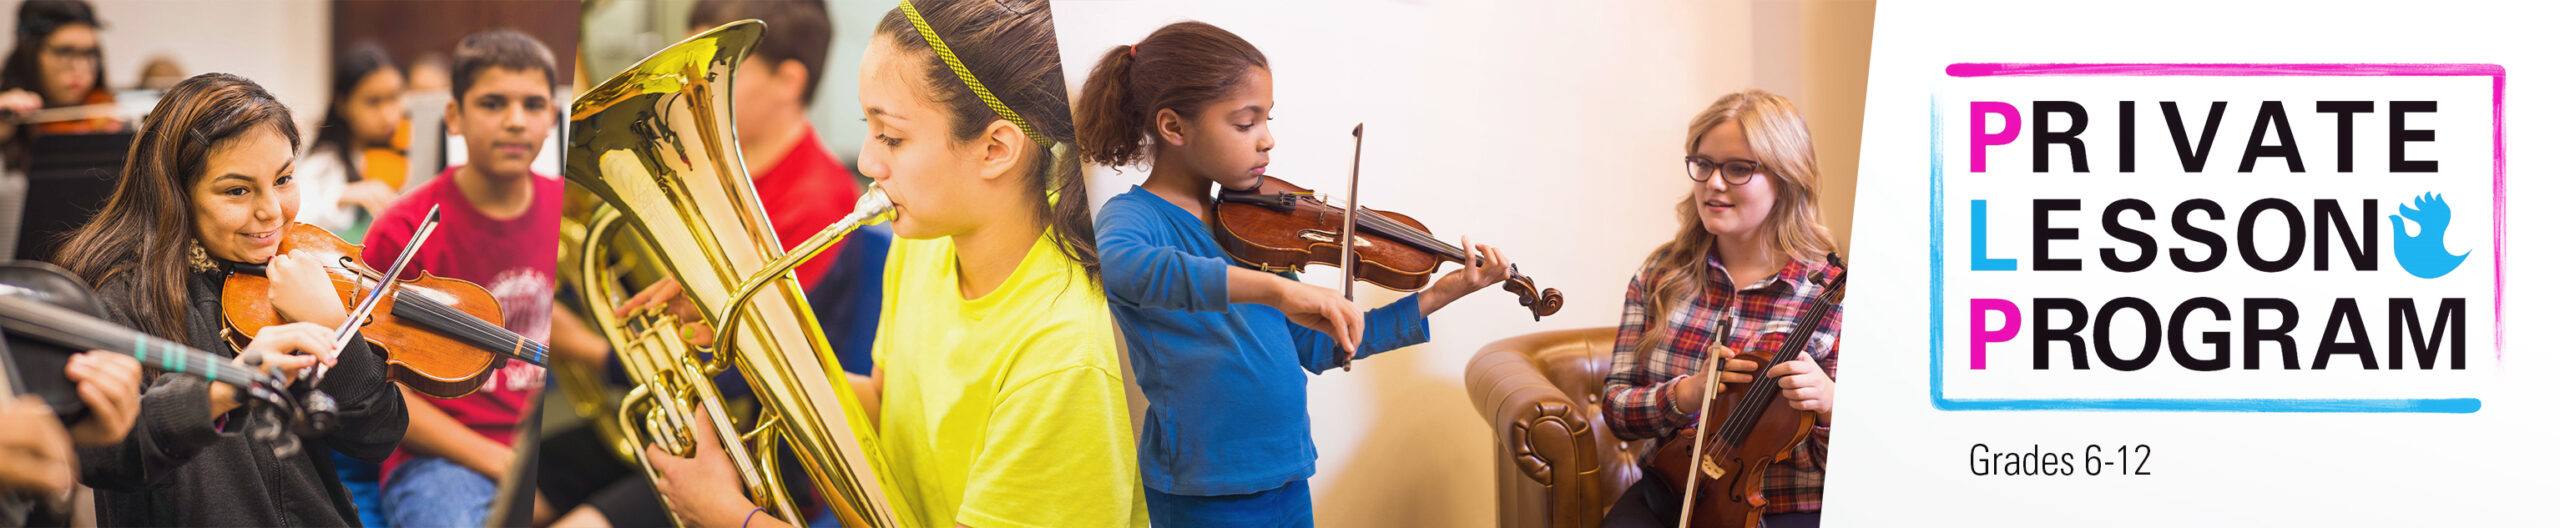 students playing instruments banner image